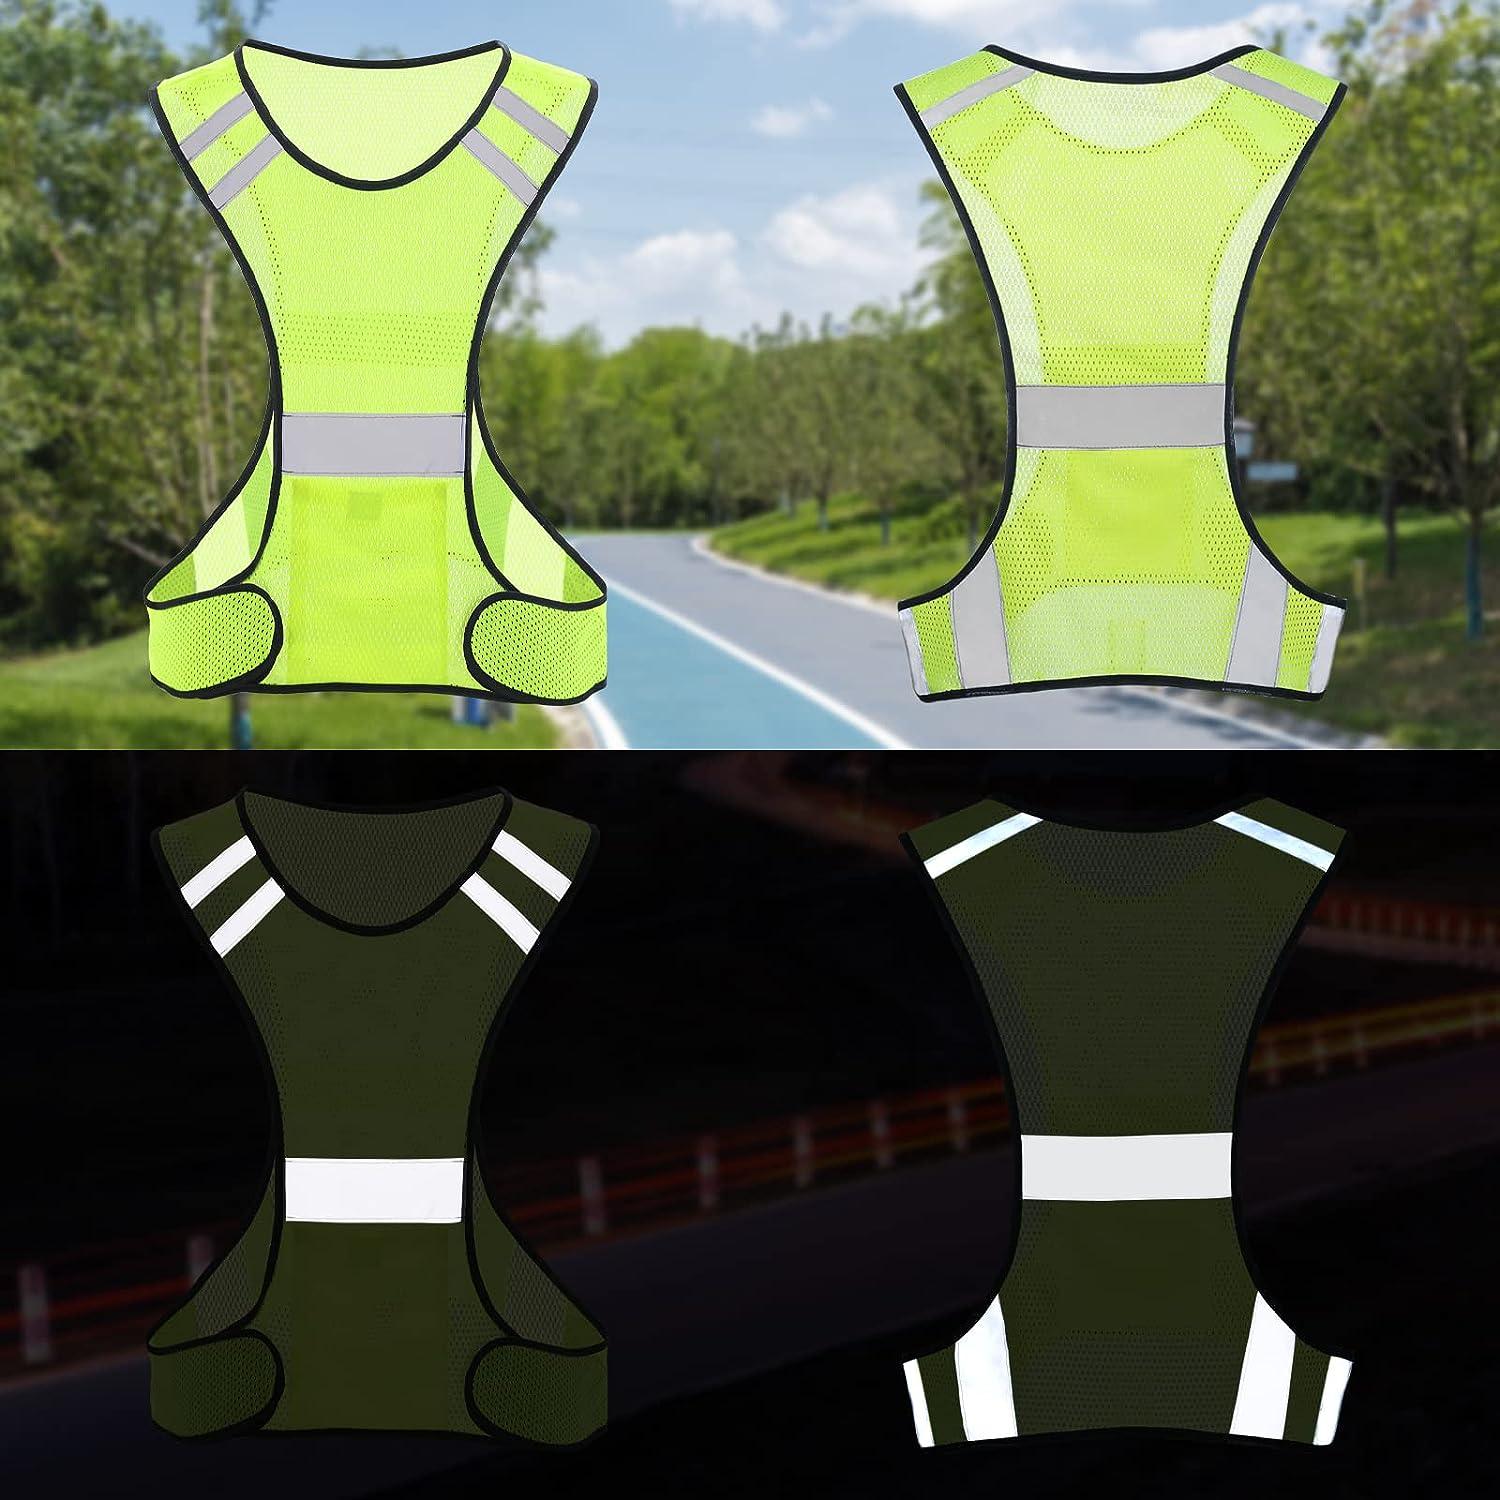 TCCFCCT Reflective Safety Running Vest for Men Wome Running Gear for  Walking at Night 1 Pack Mesh Yellow